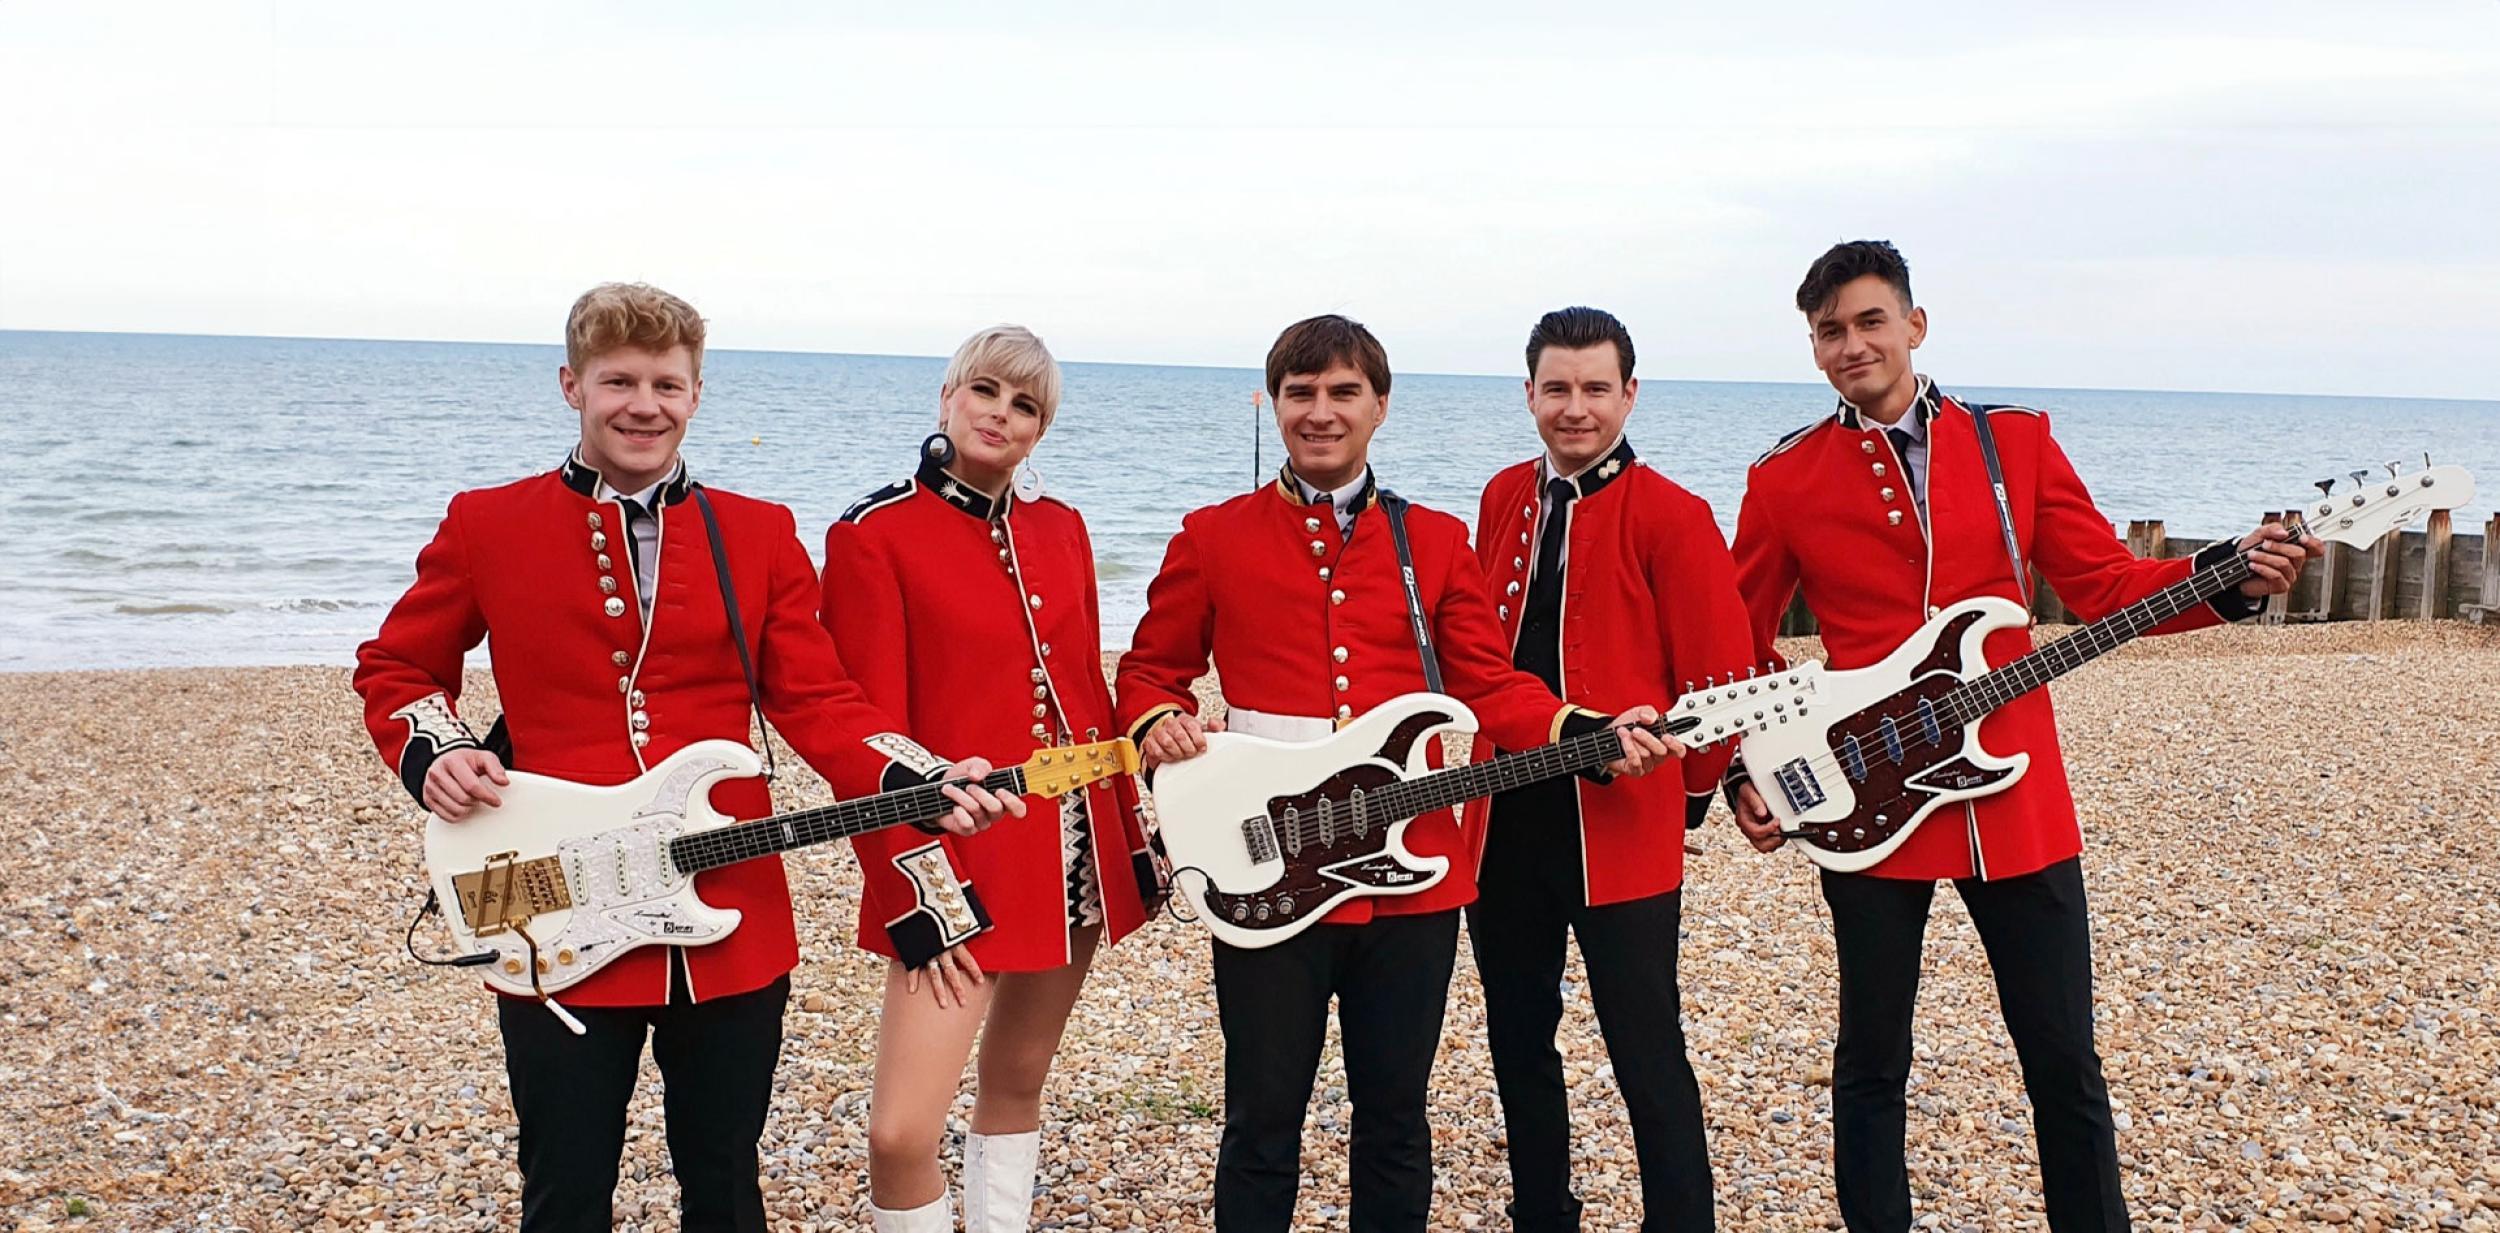 A band standing on a beach